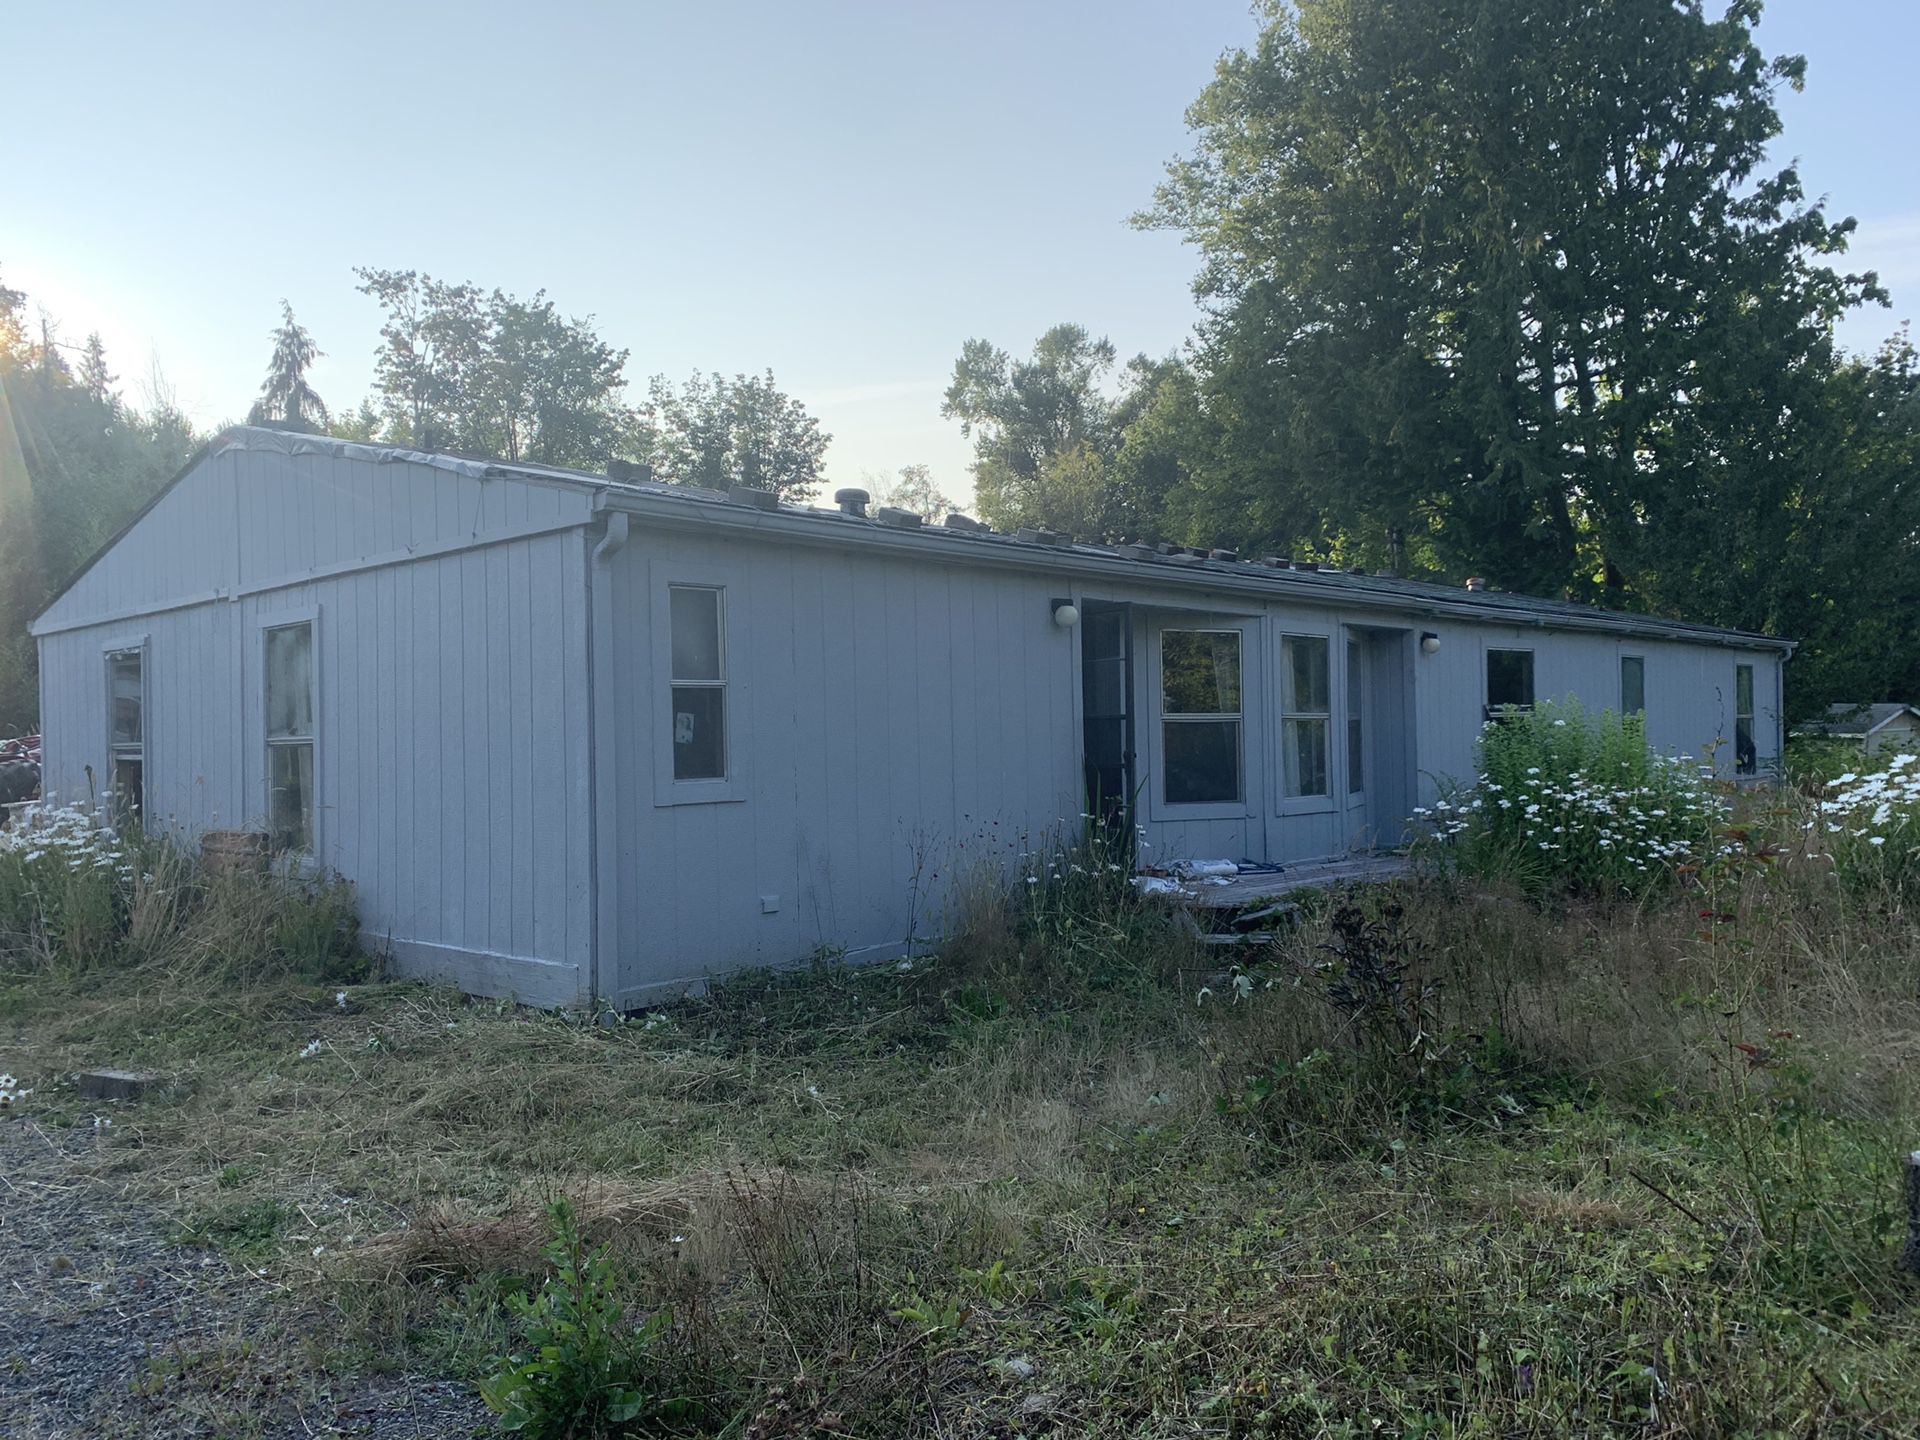 1986 Manufactured Home Repairs needed